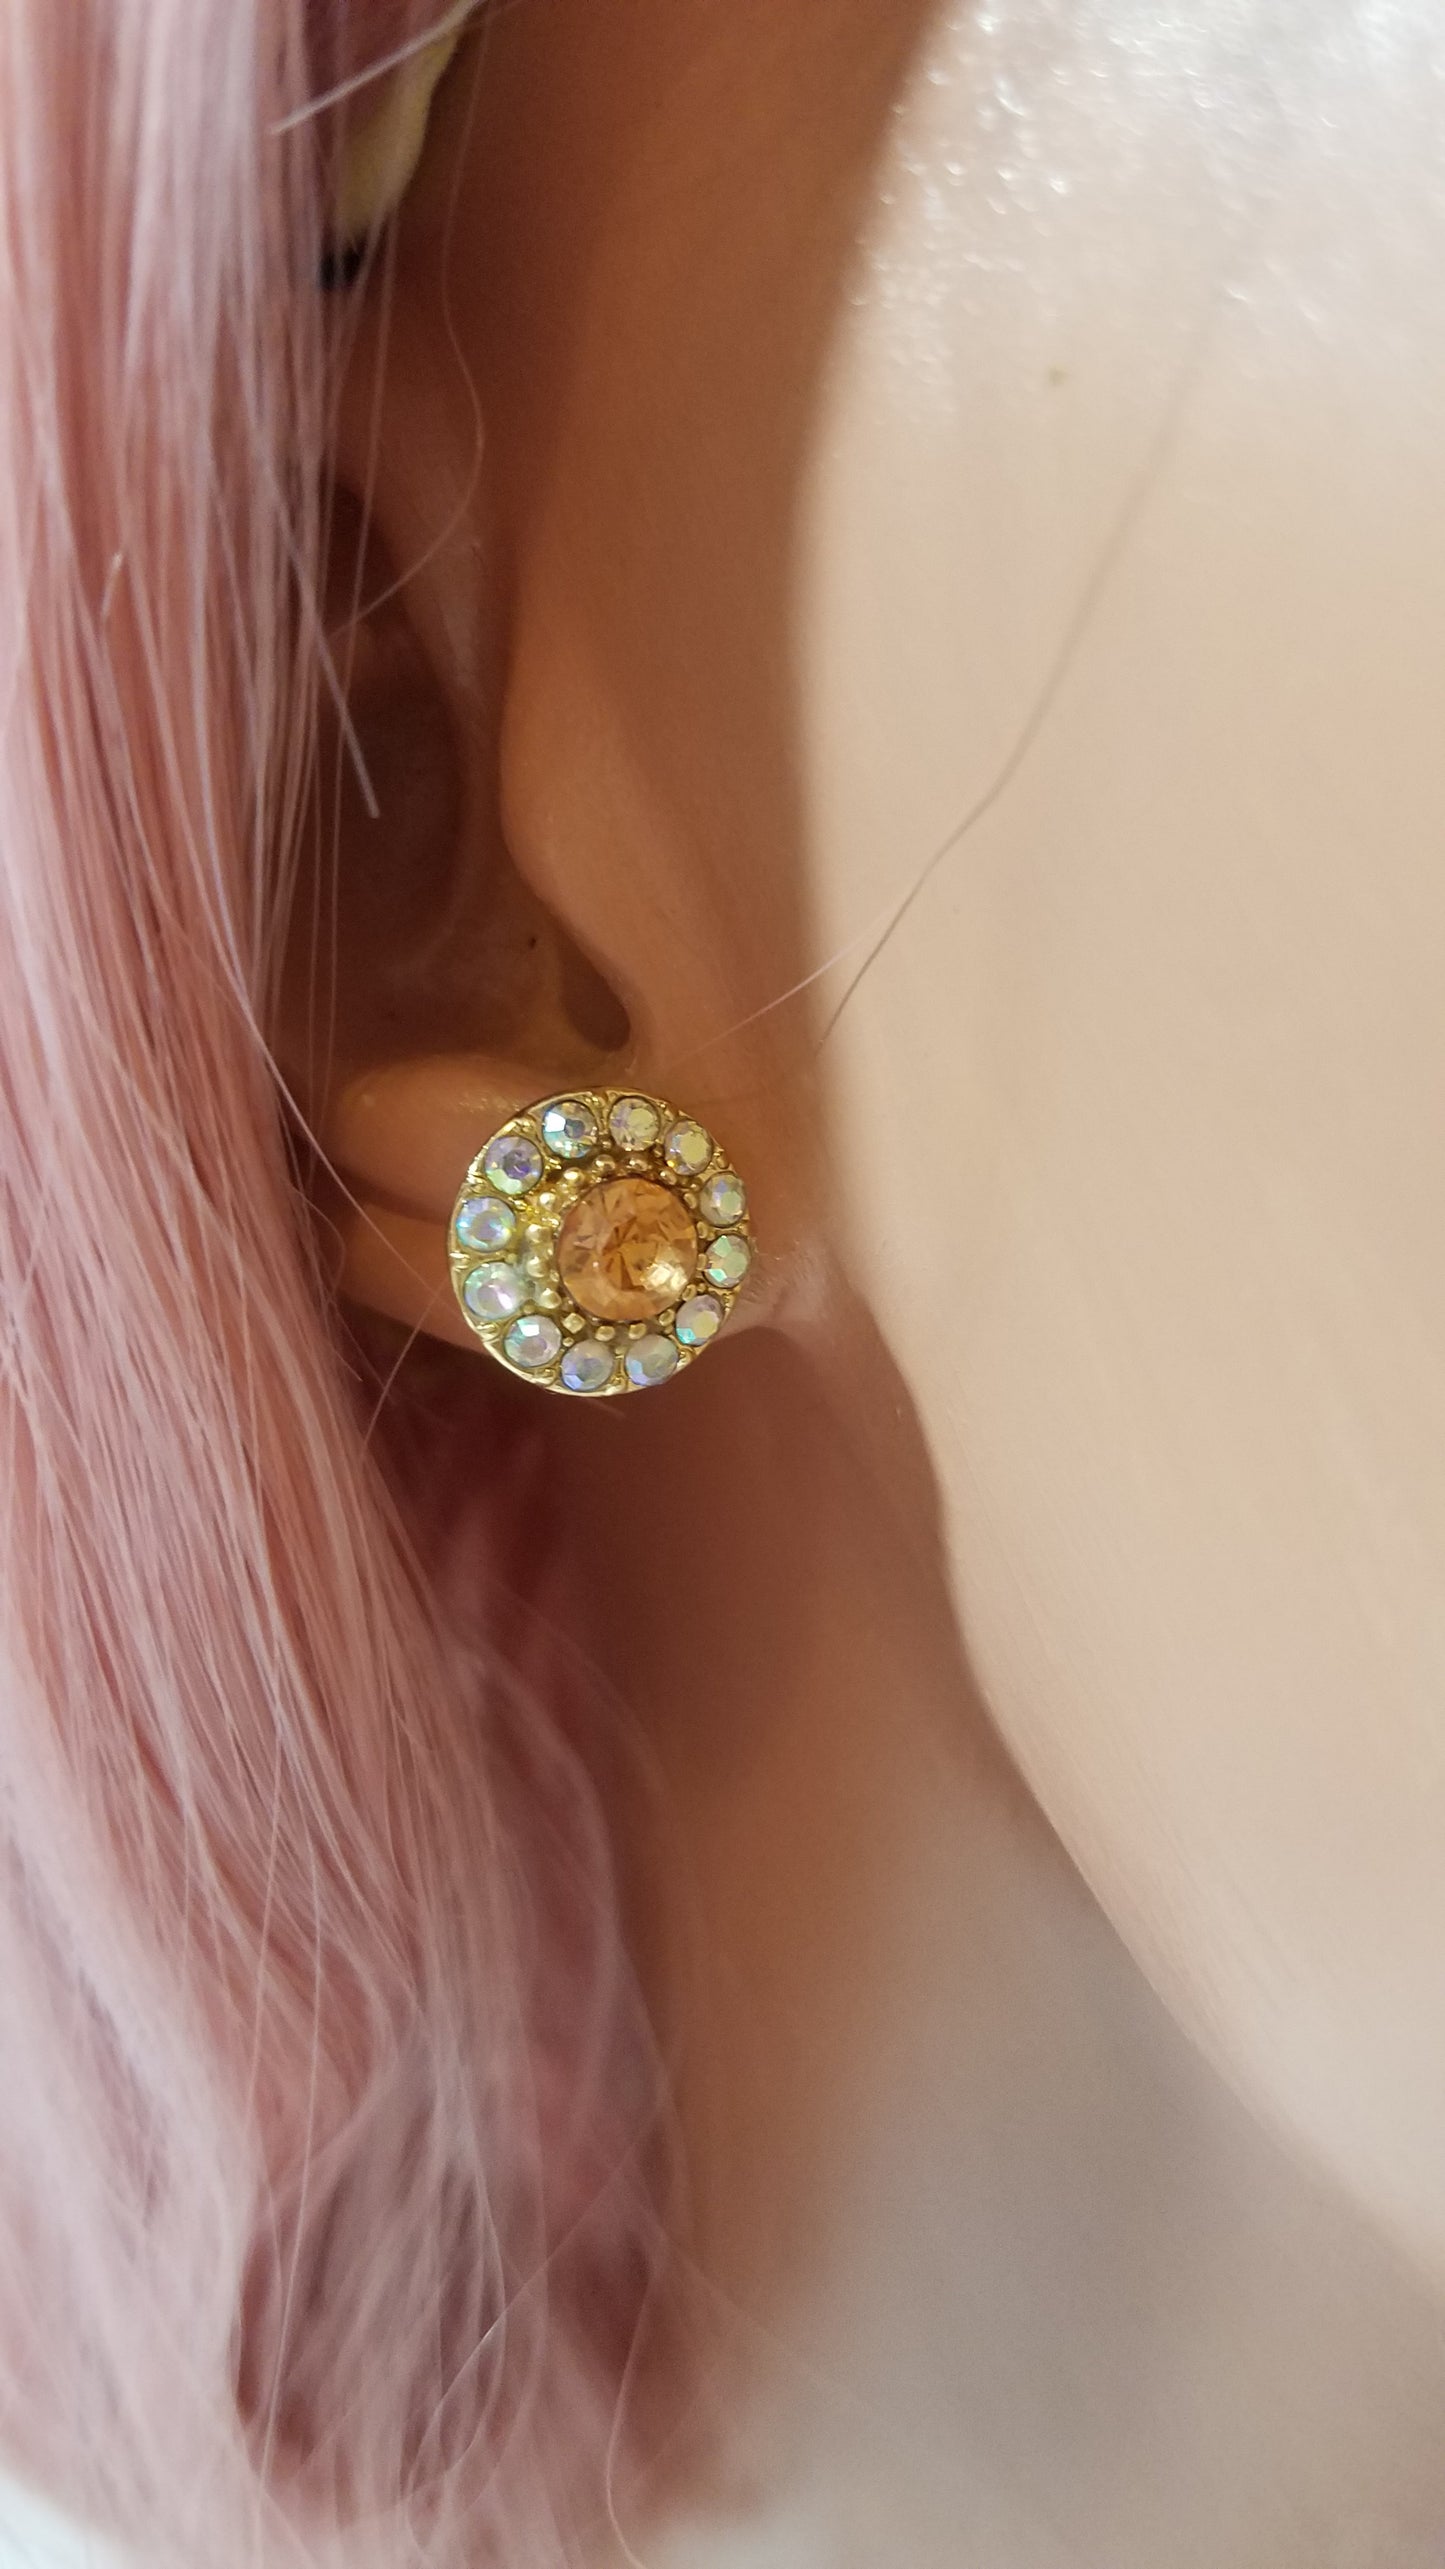 The Amber stud earrings are so glam and totally giving me Royal-Core vibes even Cottage-Core vibes! Yes, these earrings are so chic and glam they are perfect to complete your look and give you that bling!  Contains:  Crystal earring stud **Also comes with extra pair of backings for your earrings